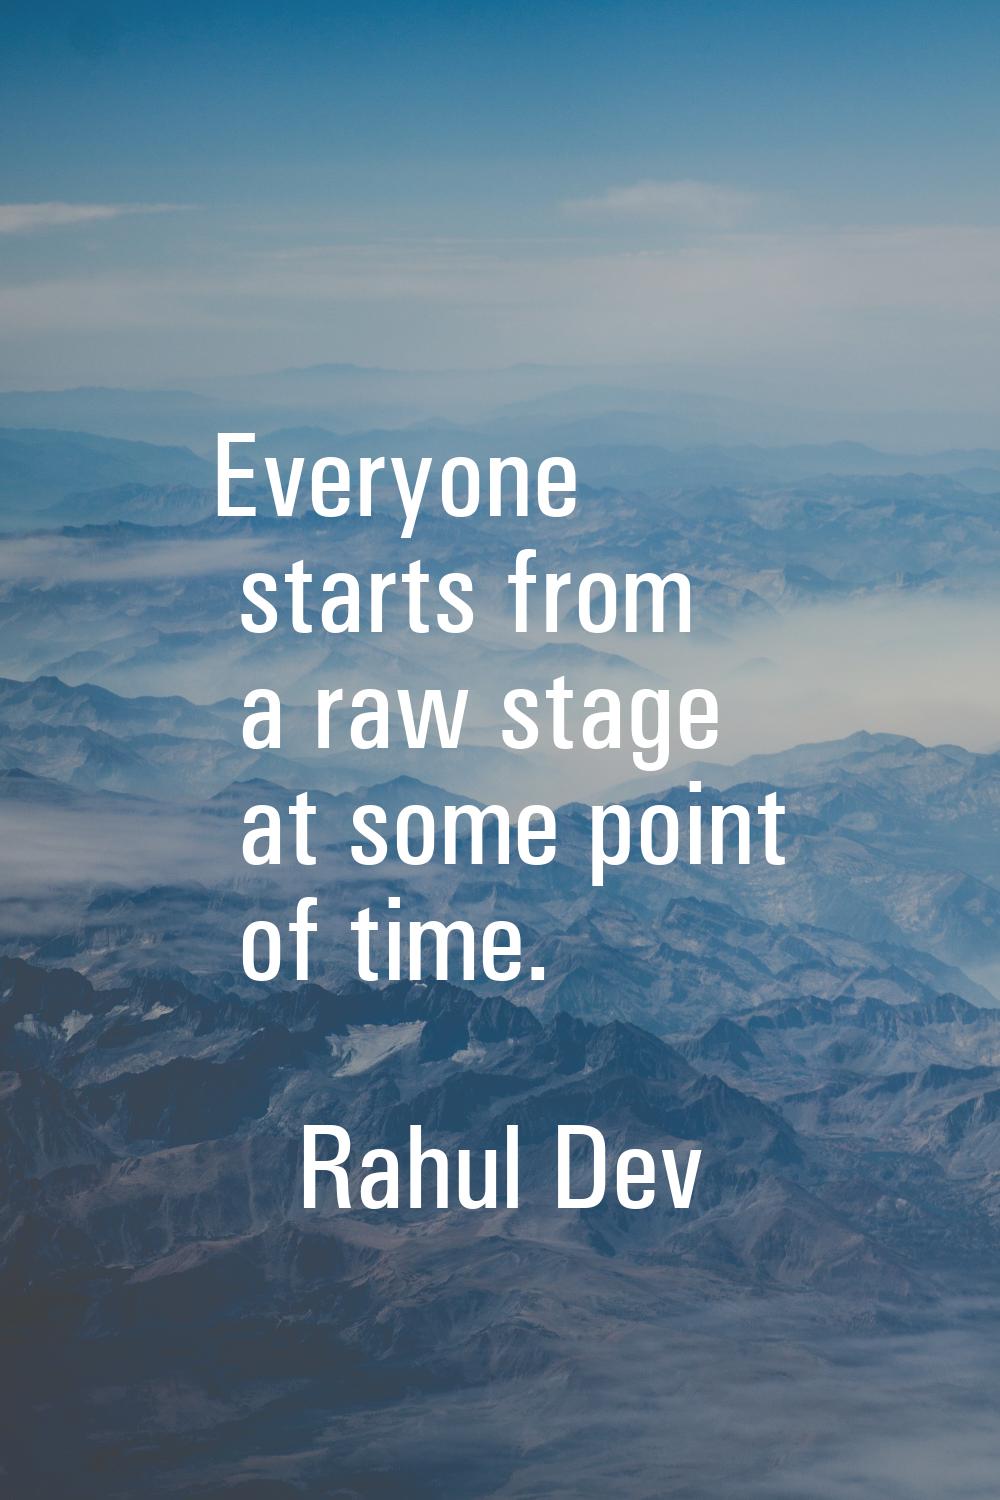 Everyone starts from a raw stage at some point of time.